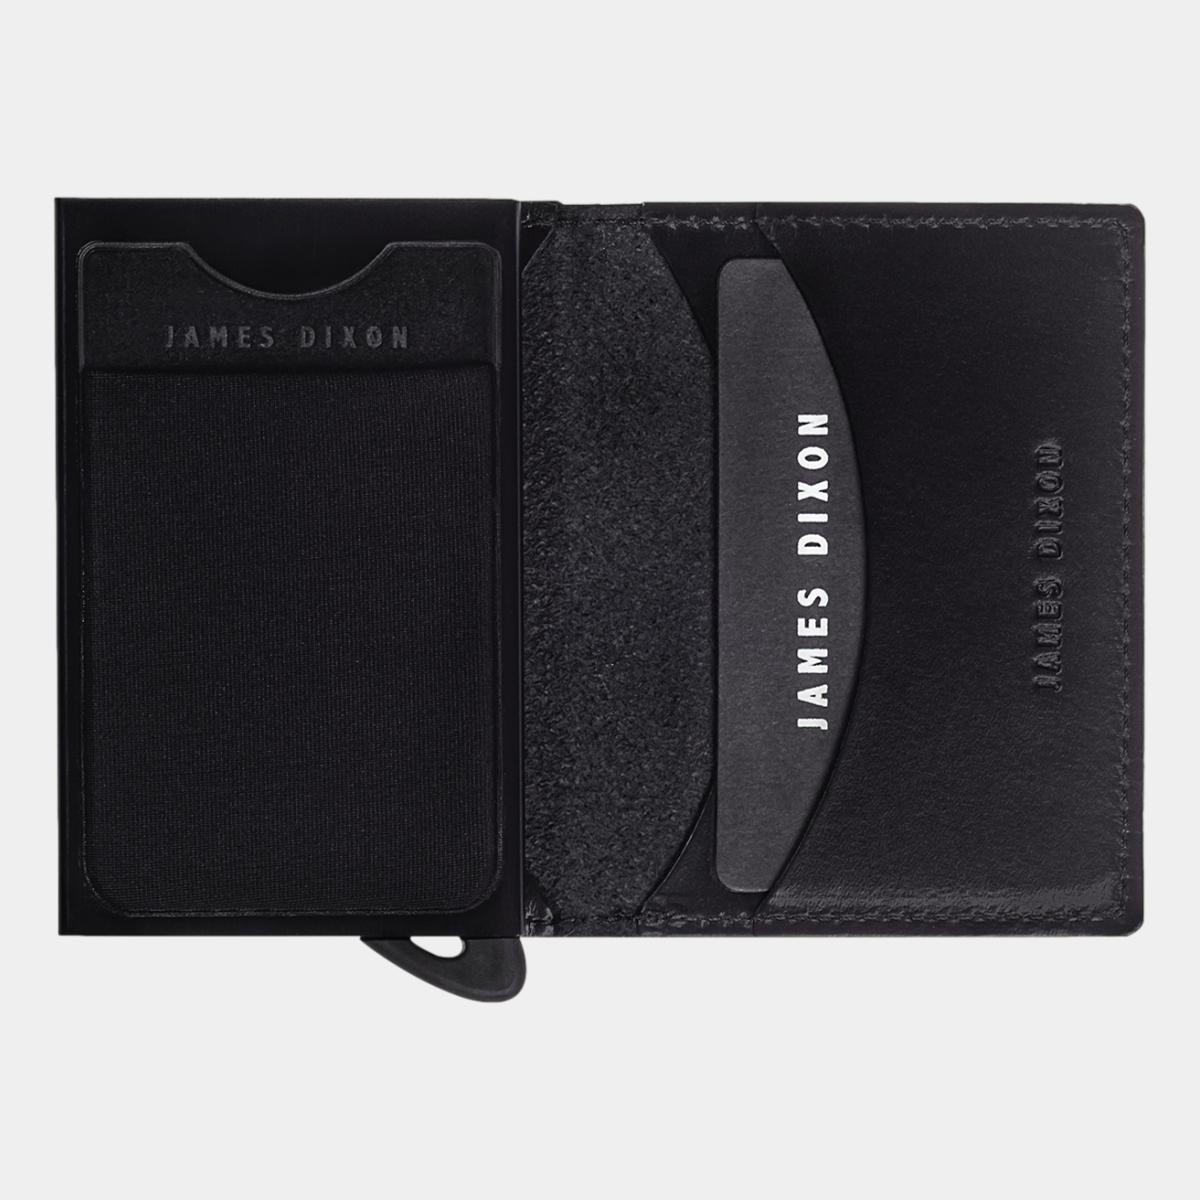 jd0068 james dixon extra cards black pocket on puro classic wallet open